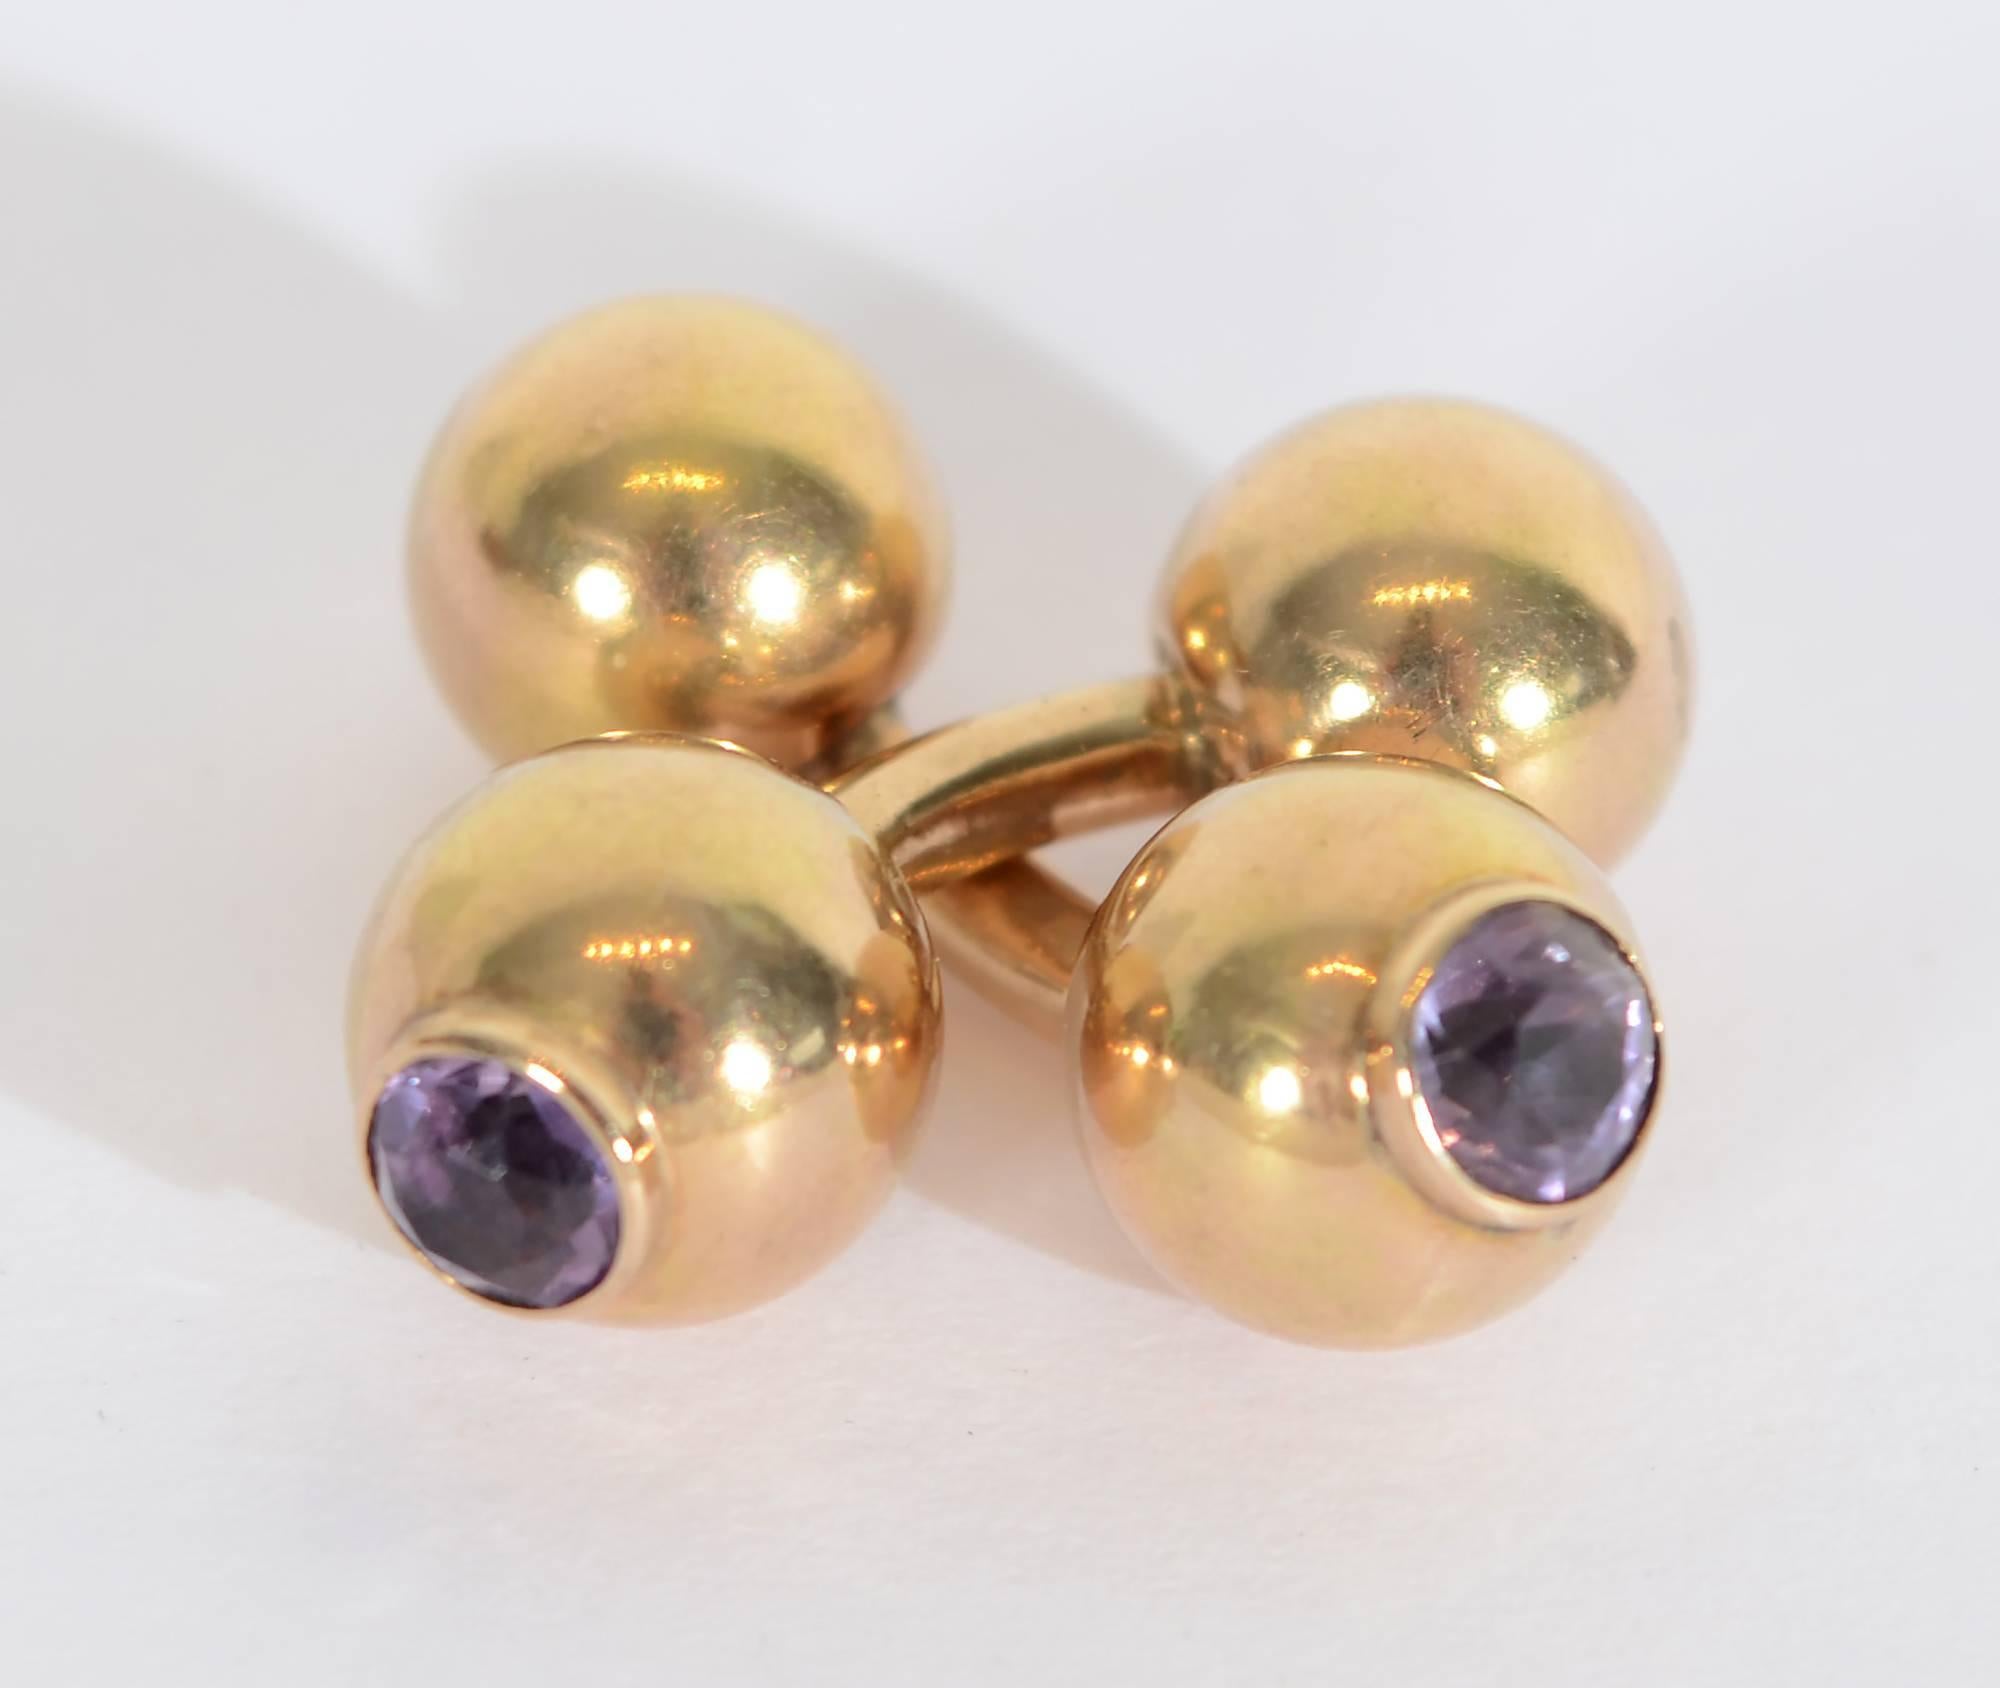 Gold double ball cufflinks suitable for either a lady or gentleman. One ball has a faceted amethyst; the other is all gold. Measure 7/8